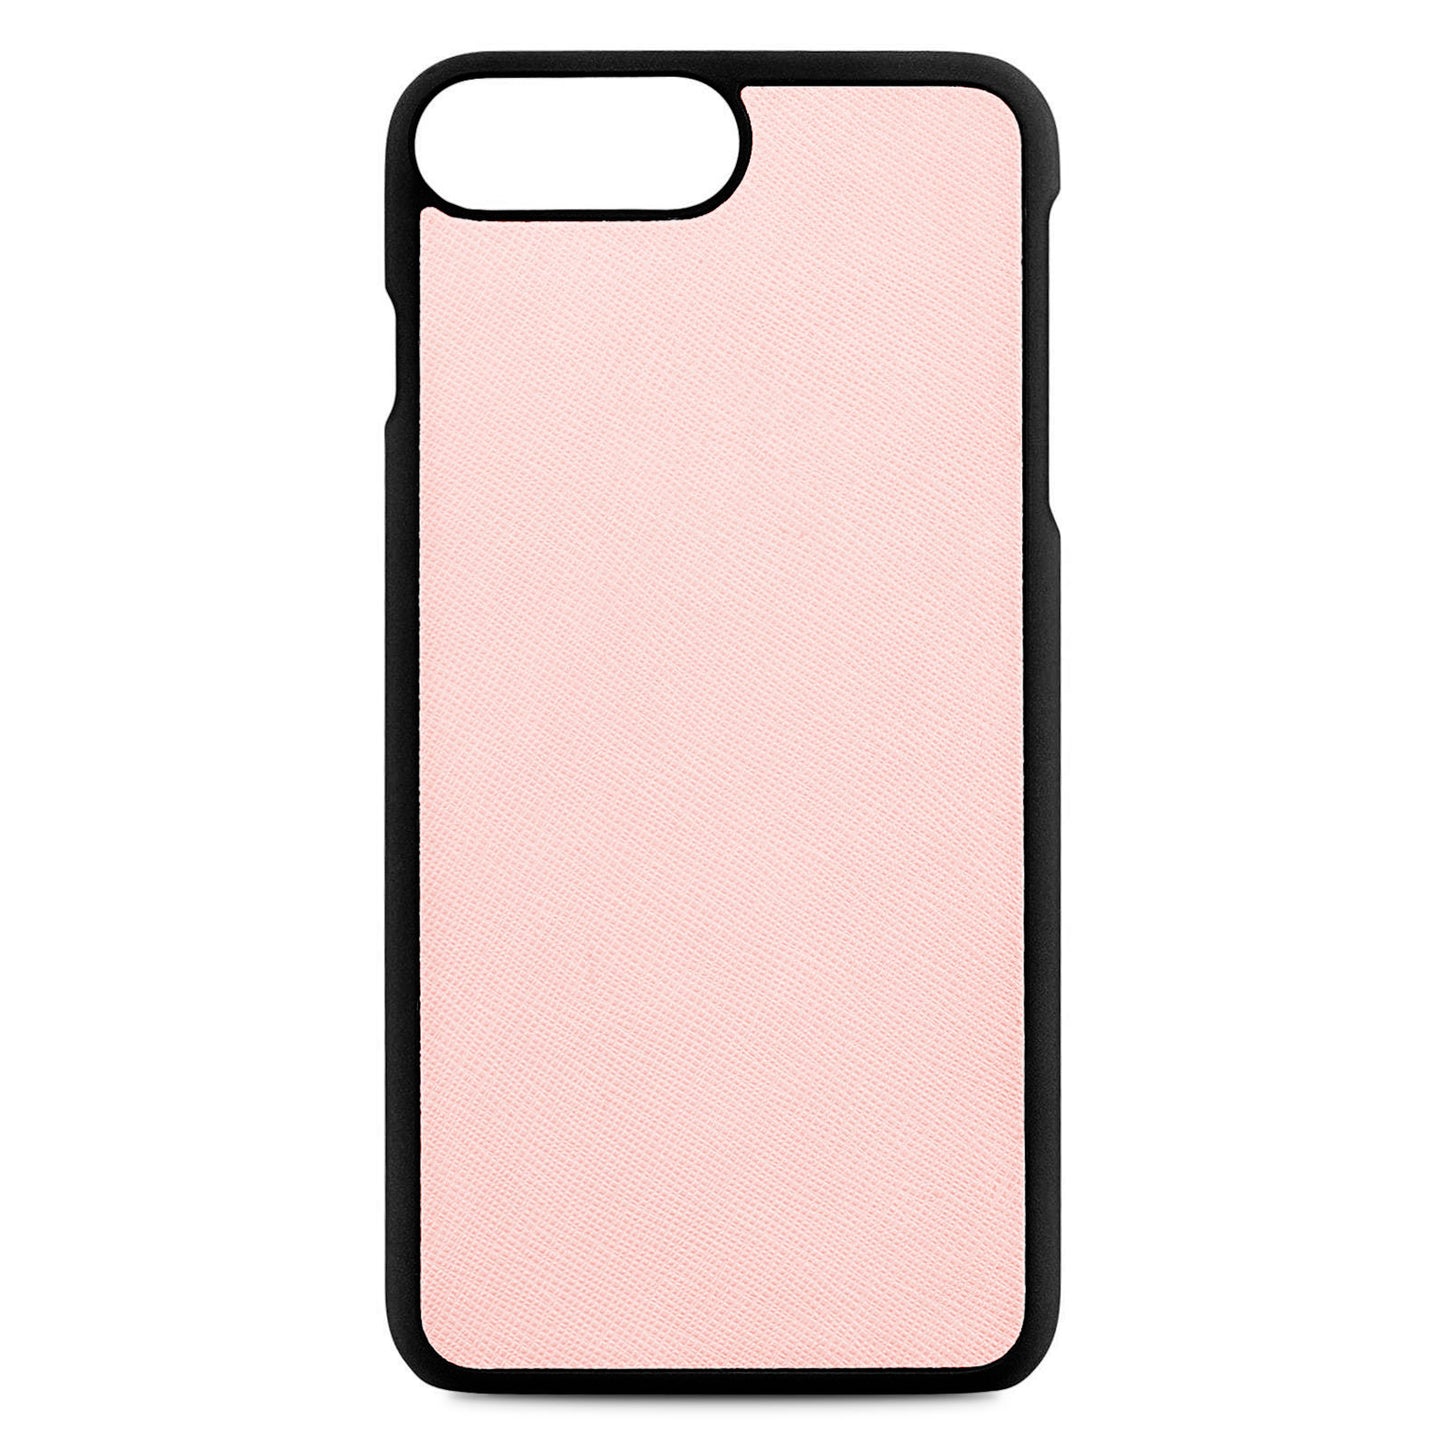 Blank Personalised Pink Saffiano Leather iPhone 8 Plus Case